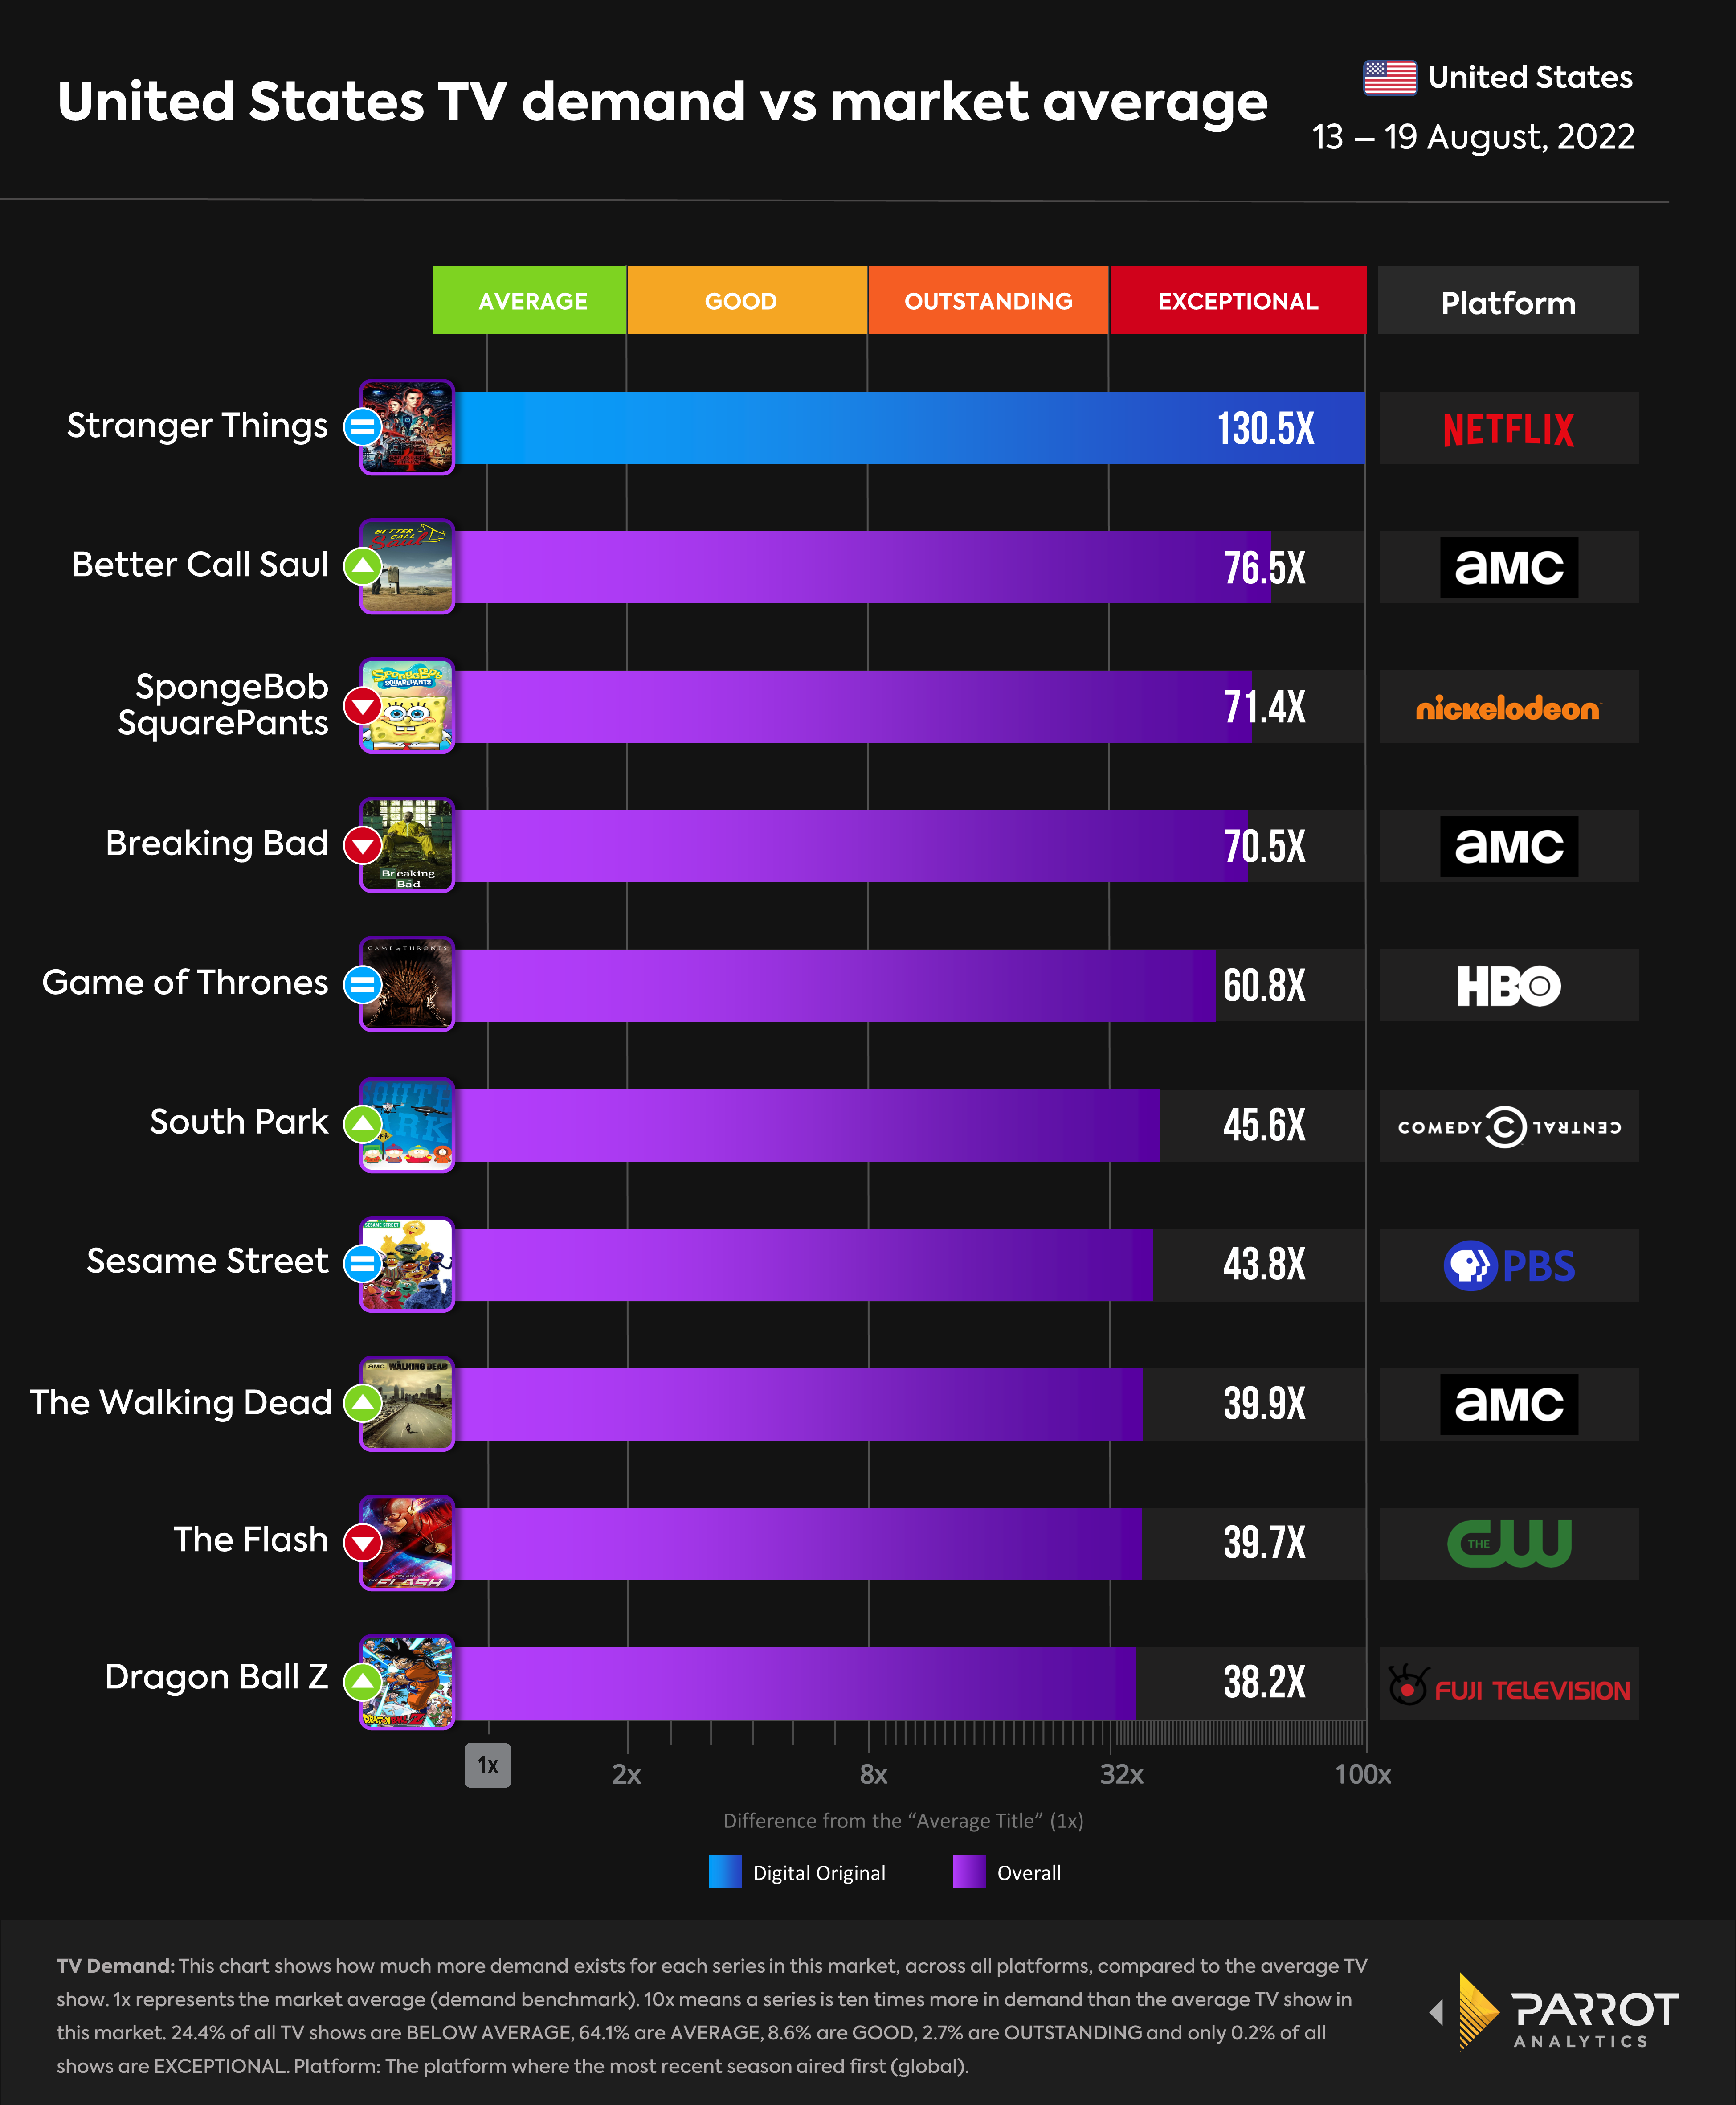 mediaplay_top10_all_series_8.22.png